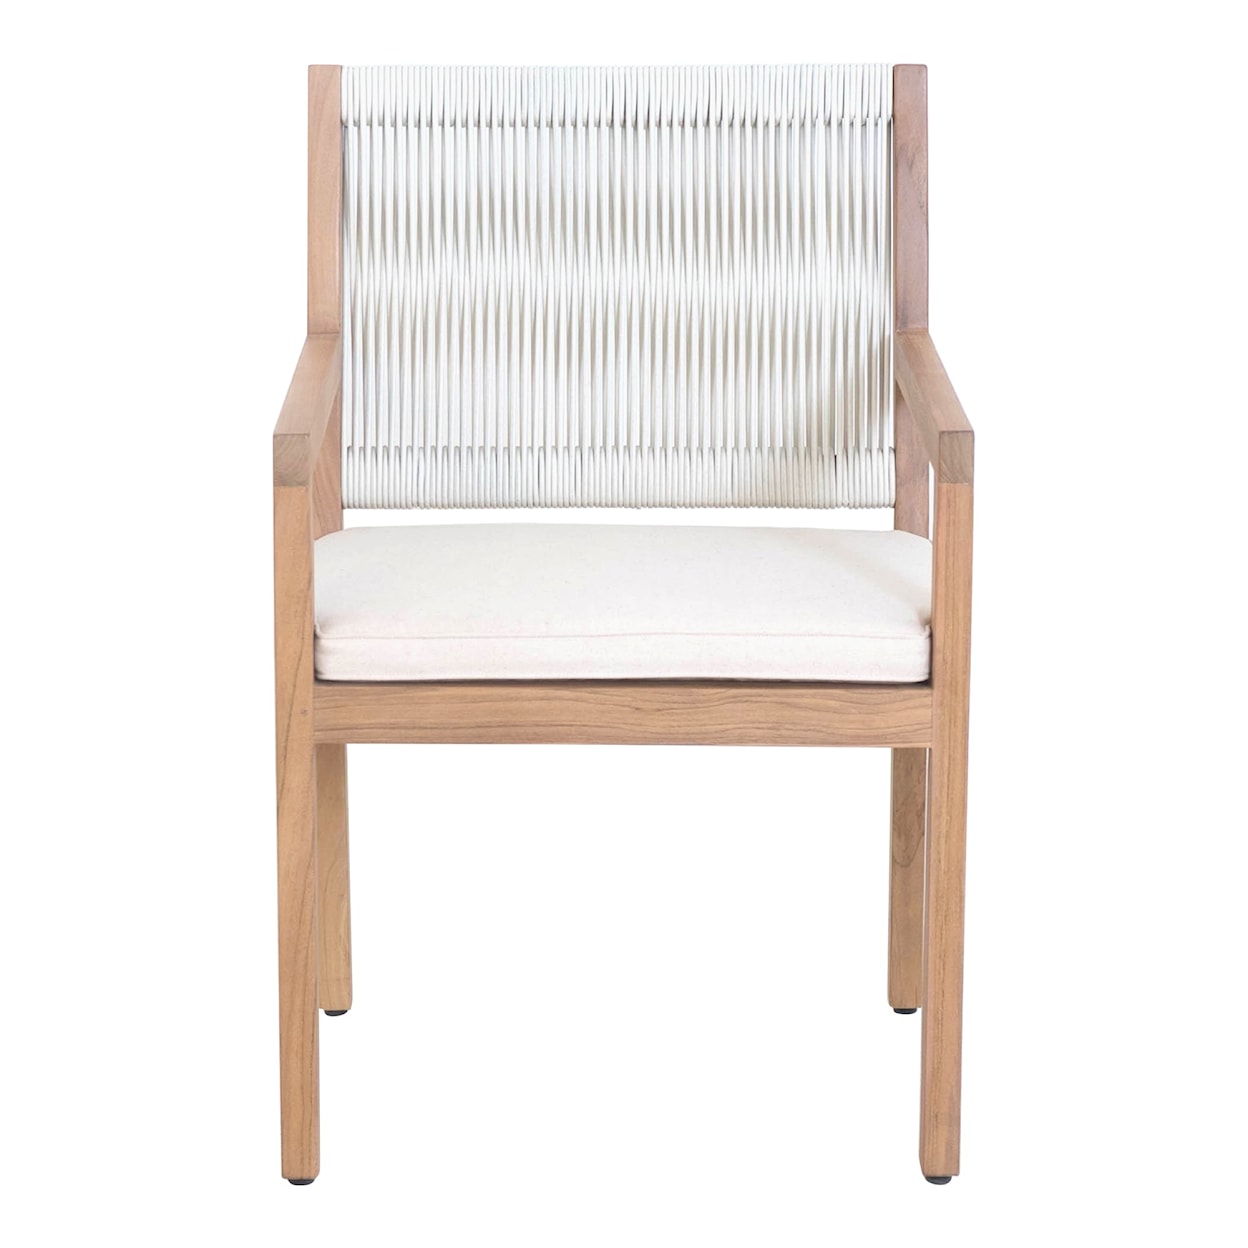 Moe's Home Collection Luce Outdoor Dining Arm Chair